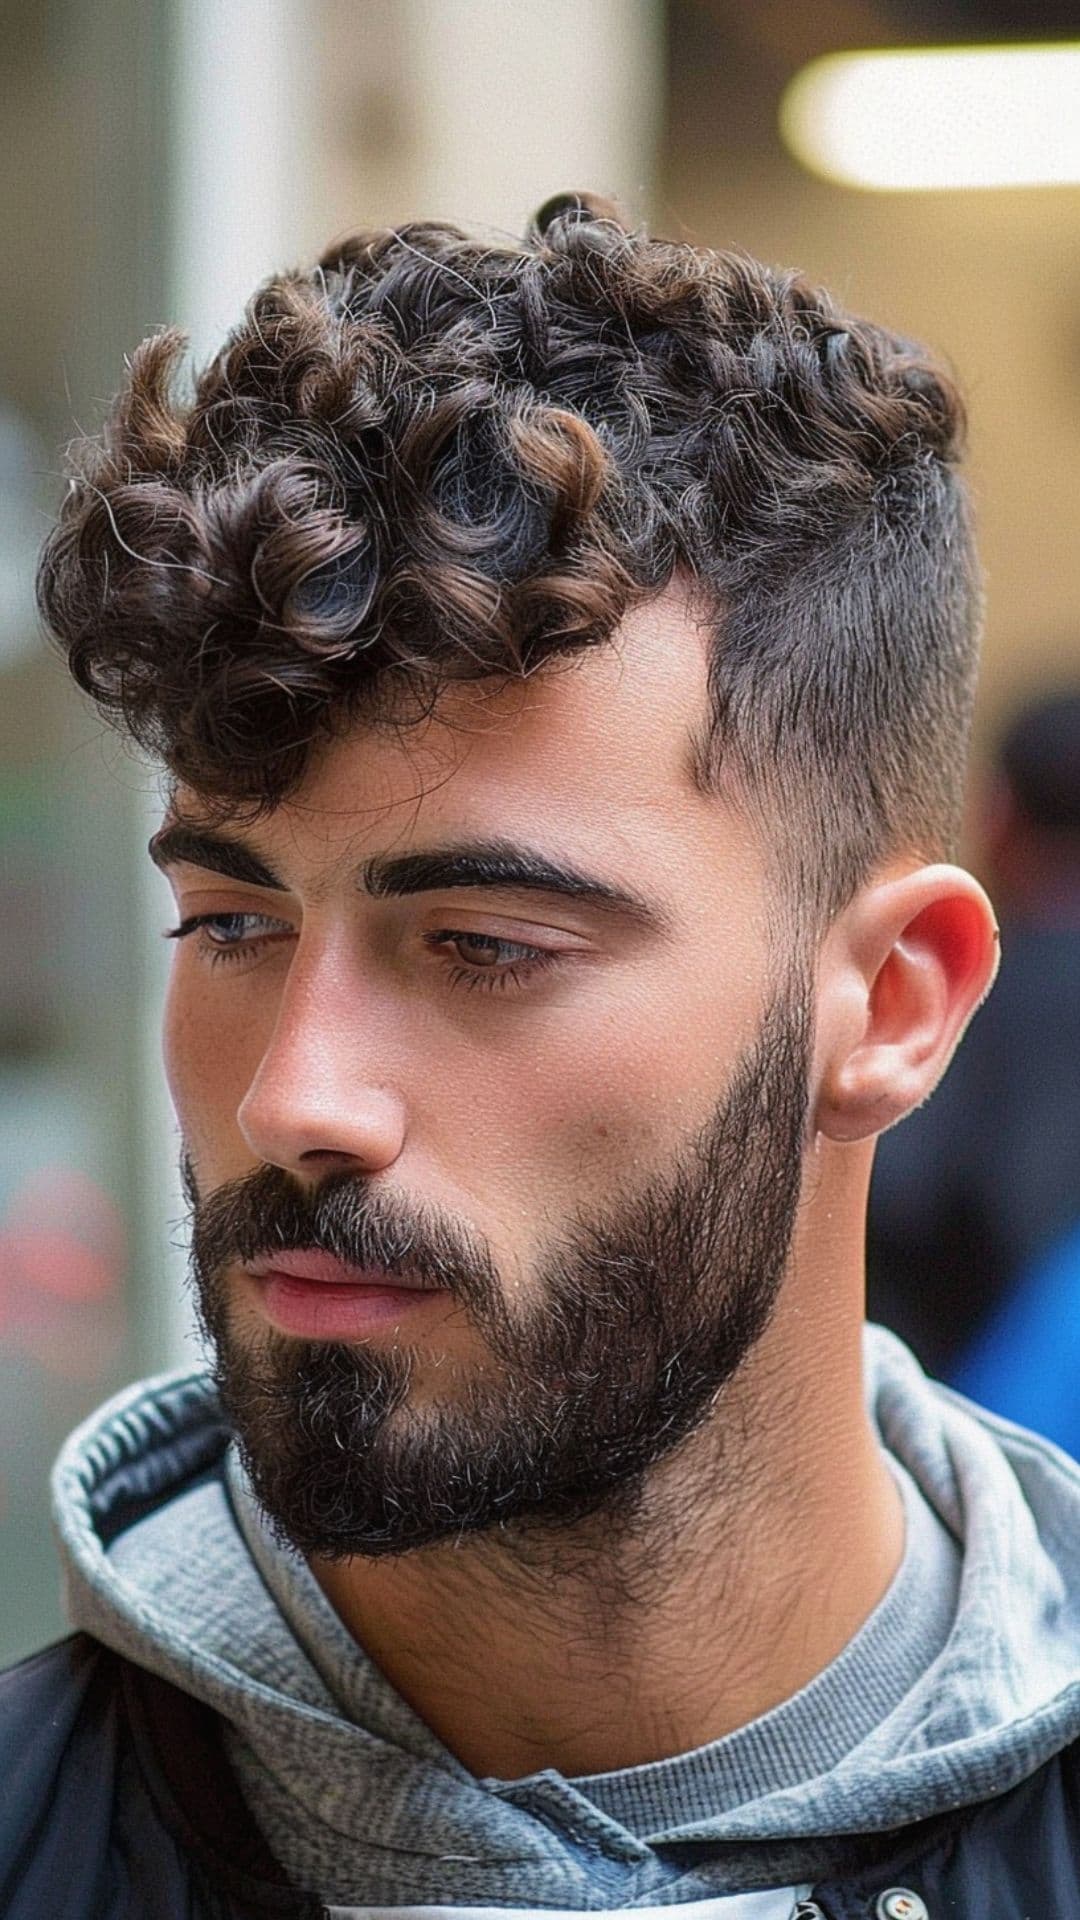 A man modelling a curly brush up hairstyle.